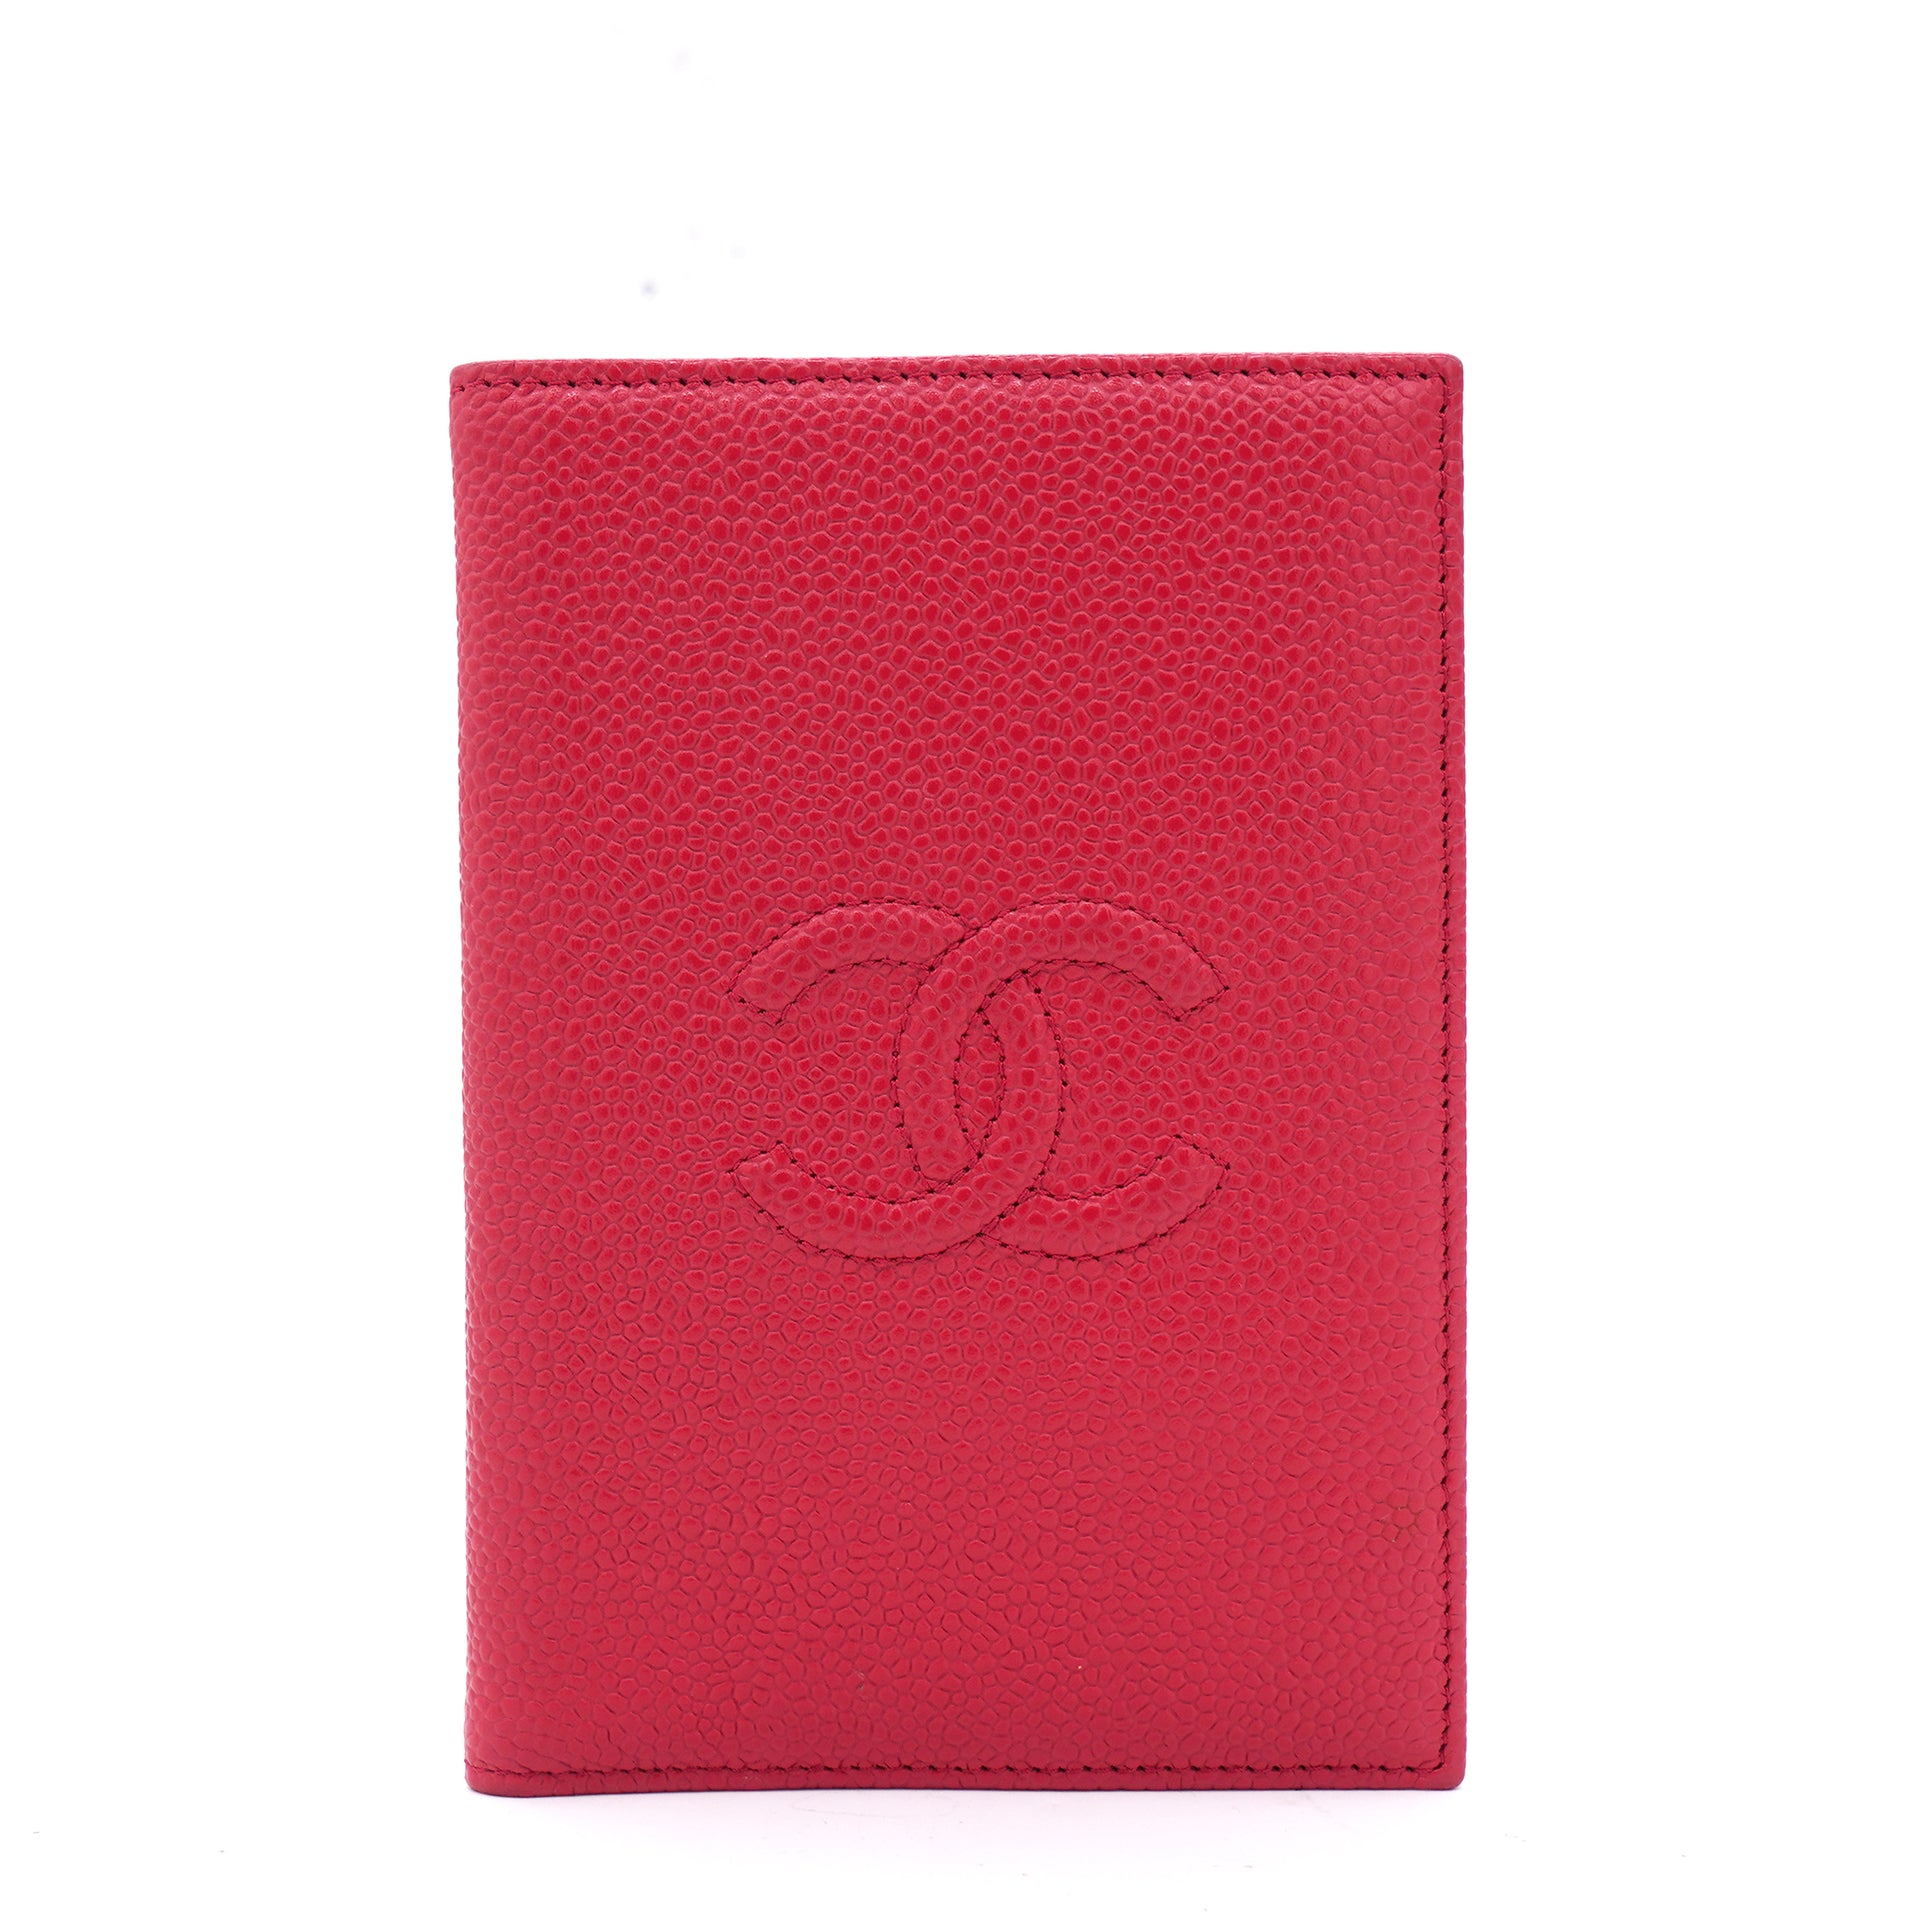 Chanel Red Caviar Leather CC Timeless Passport Holder Cover – STYLISHTOP